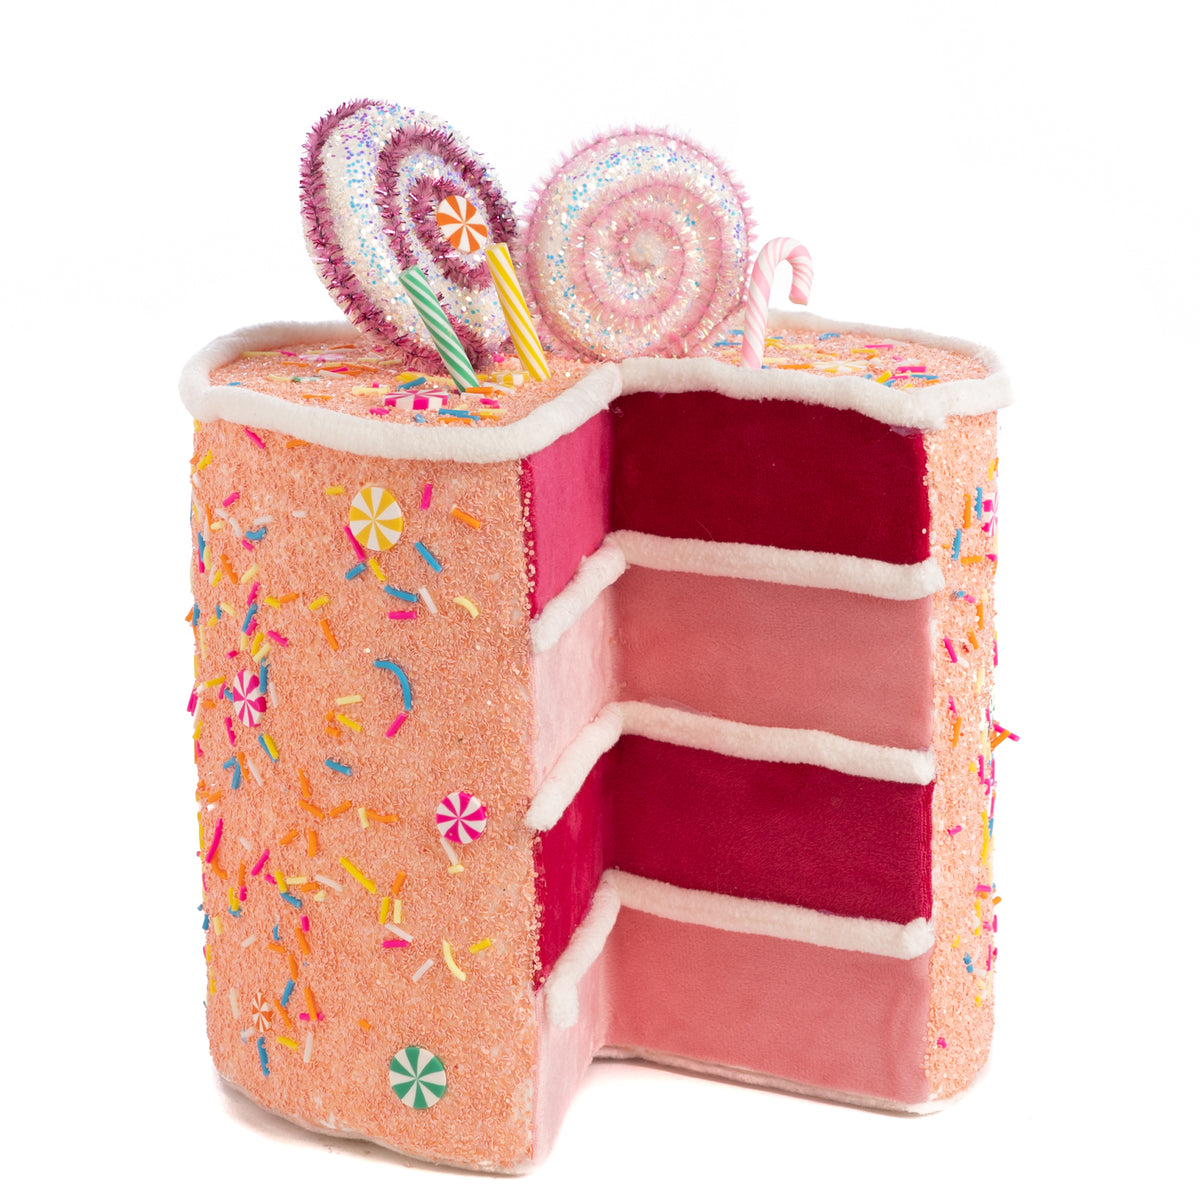 FABR.CANDY CAKE - T 79083